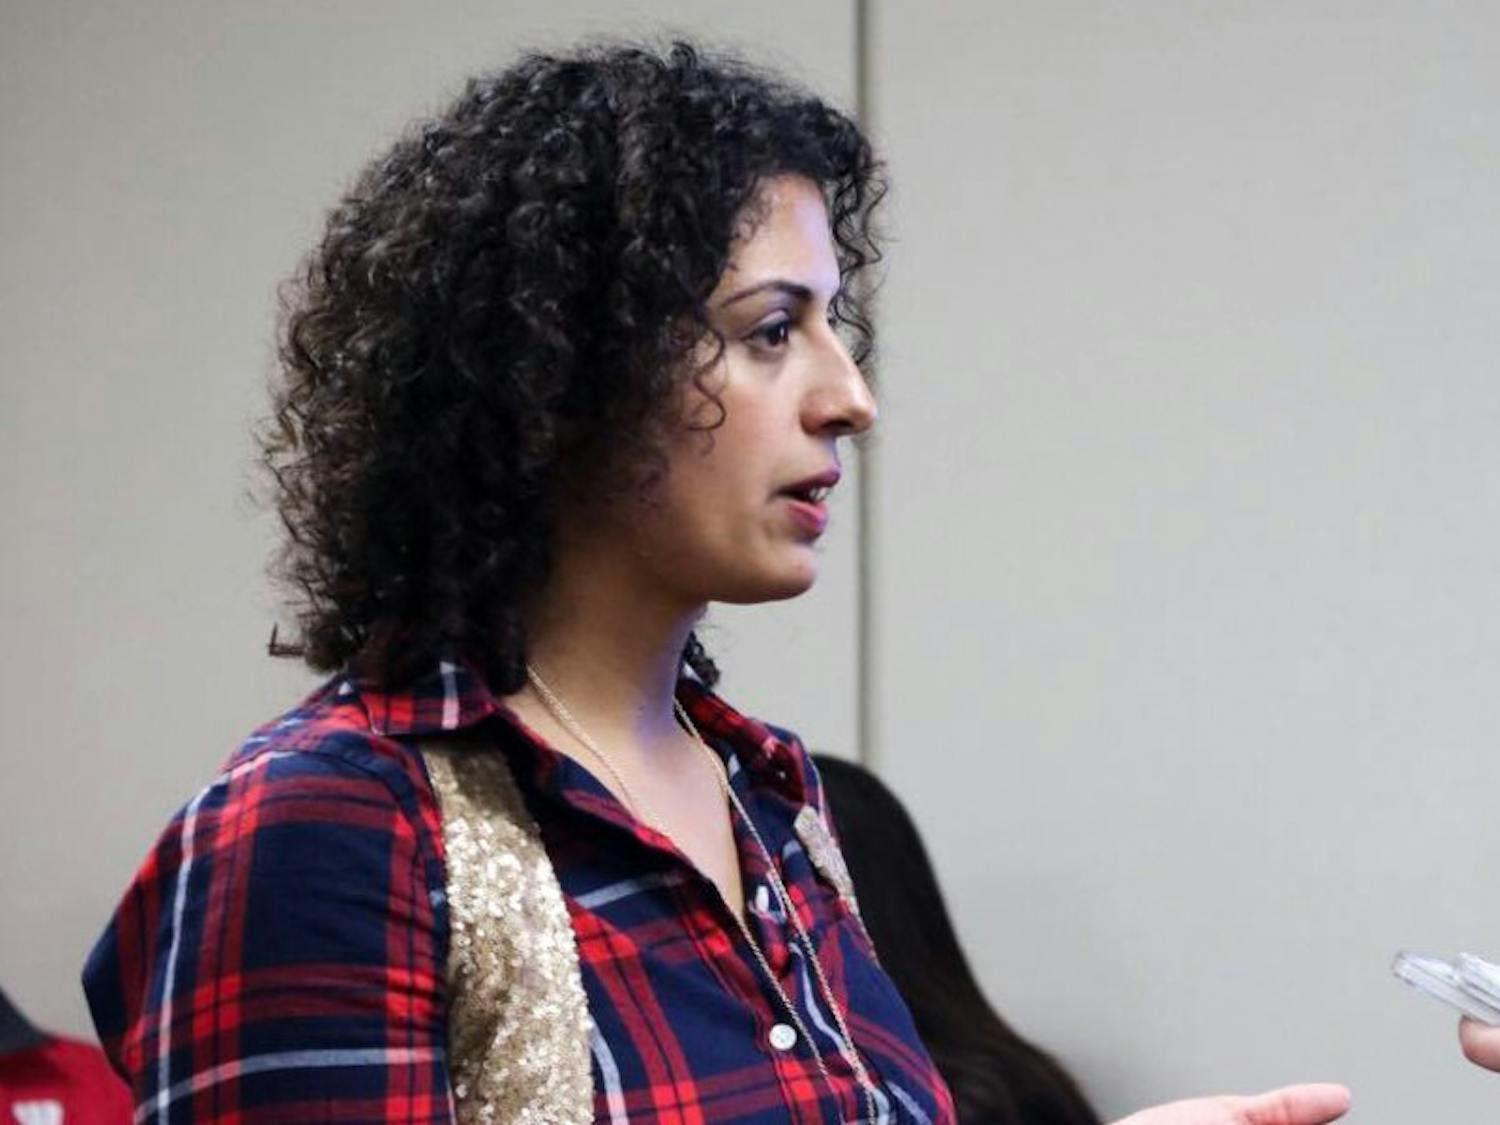 Chican@ and Latinx Advisor Rachelle Eilers prompted discussion about forming a stronger Latinx community on UW-Madison’s campus at a town hall meeting.